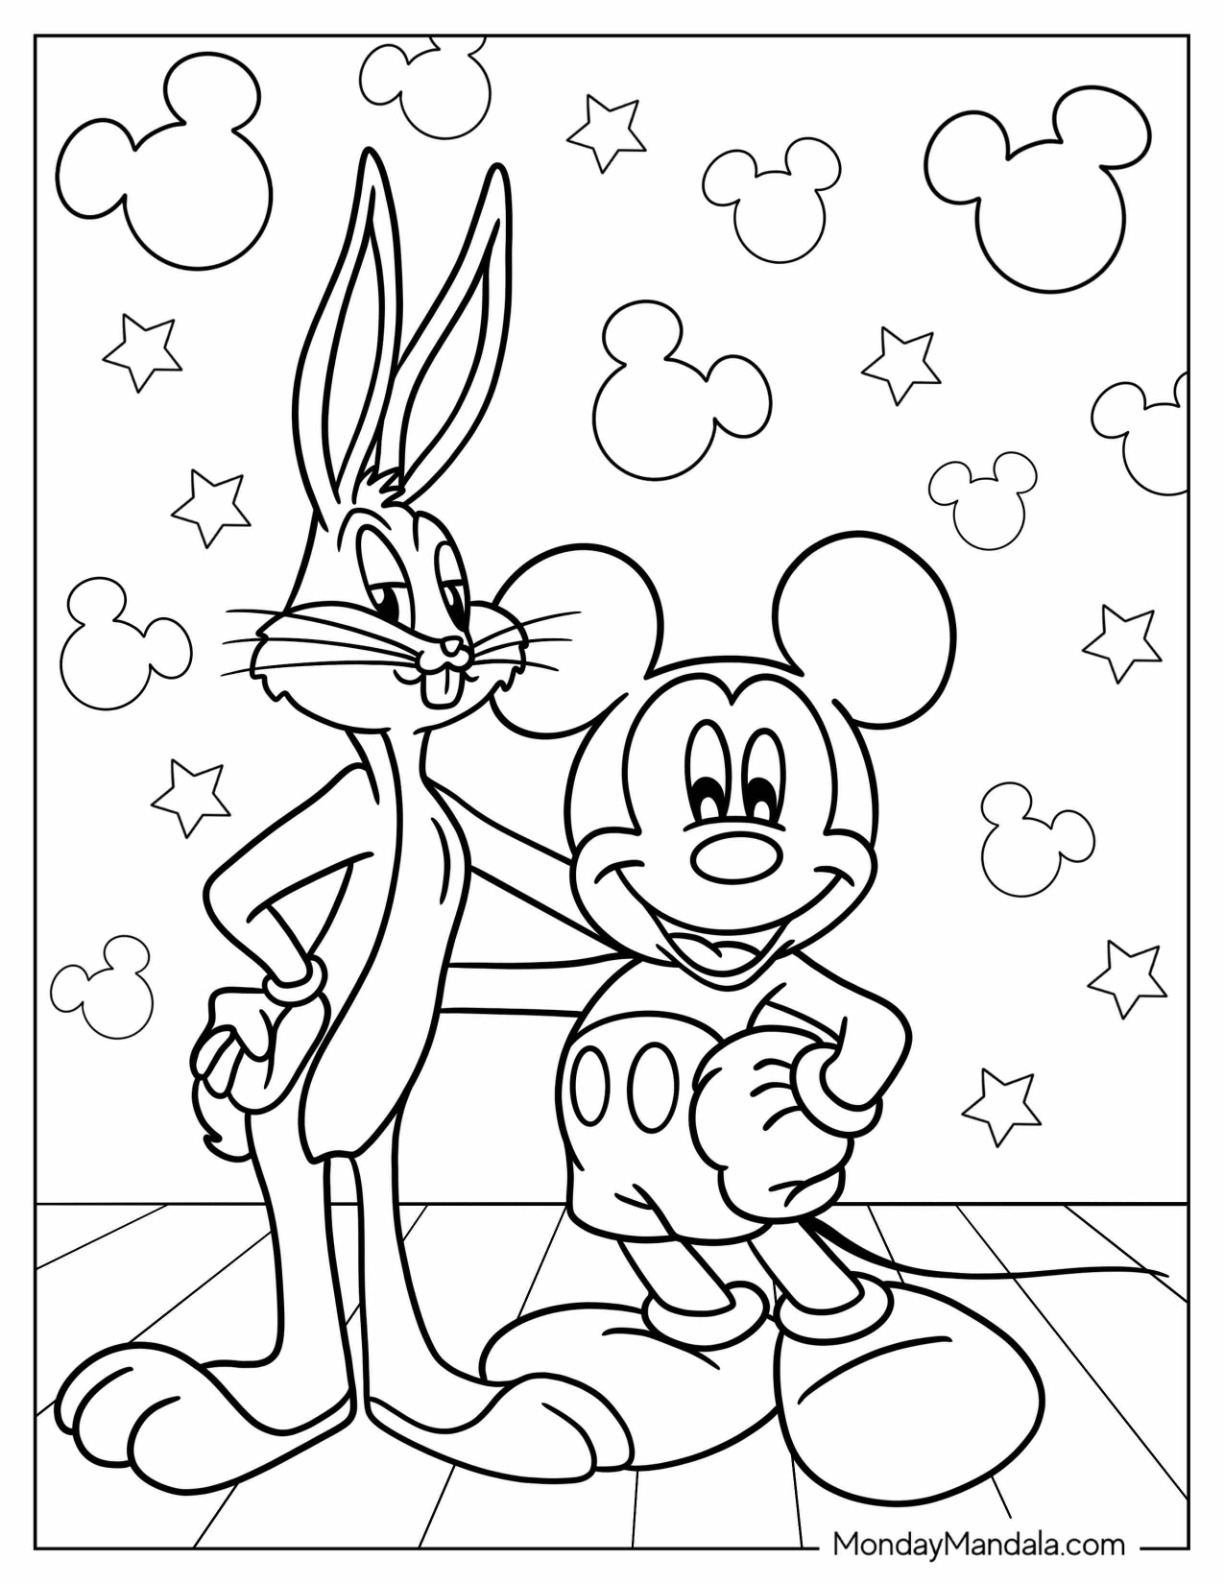 20 Bugs Bunny Coloring Pages Free PDF Printables - Free Printable Bugs Bunny Coloring Pages